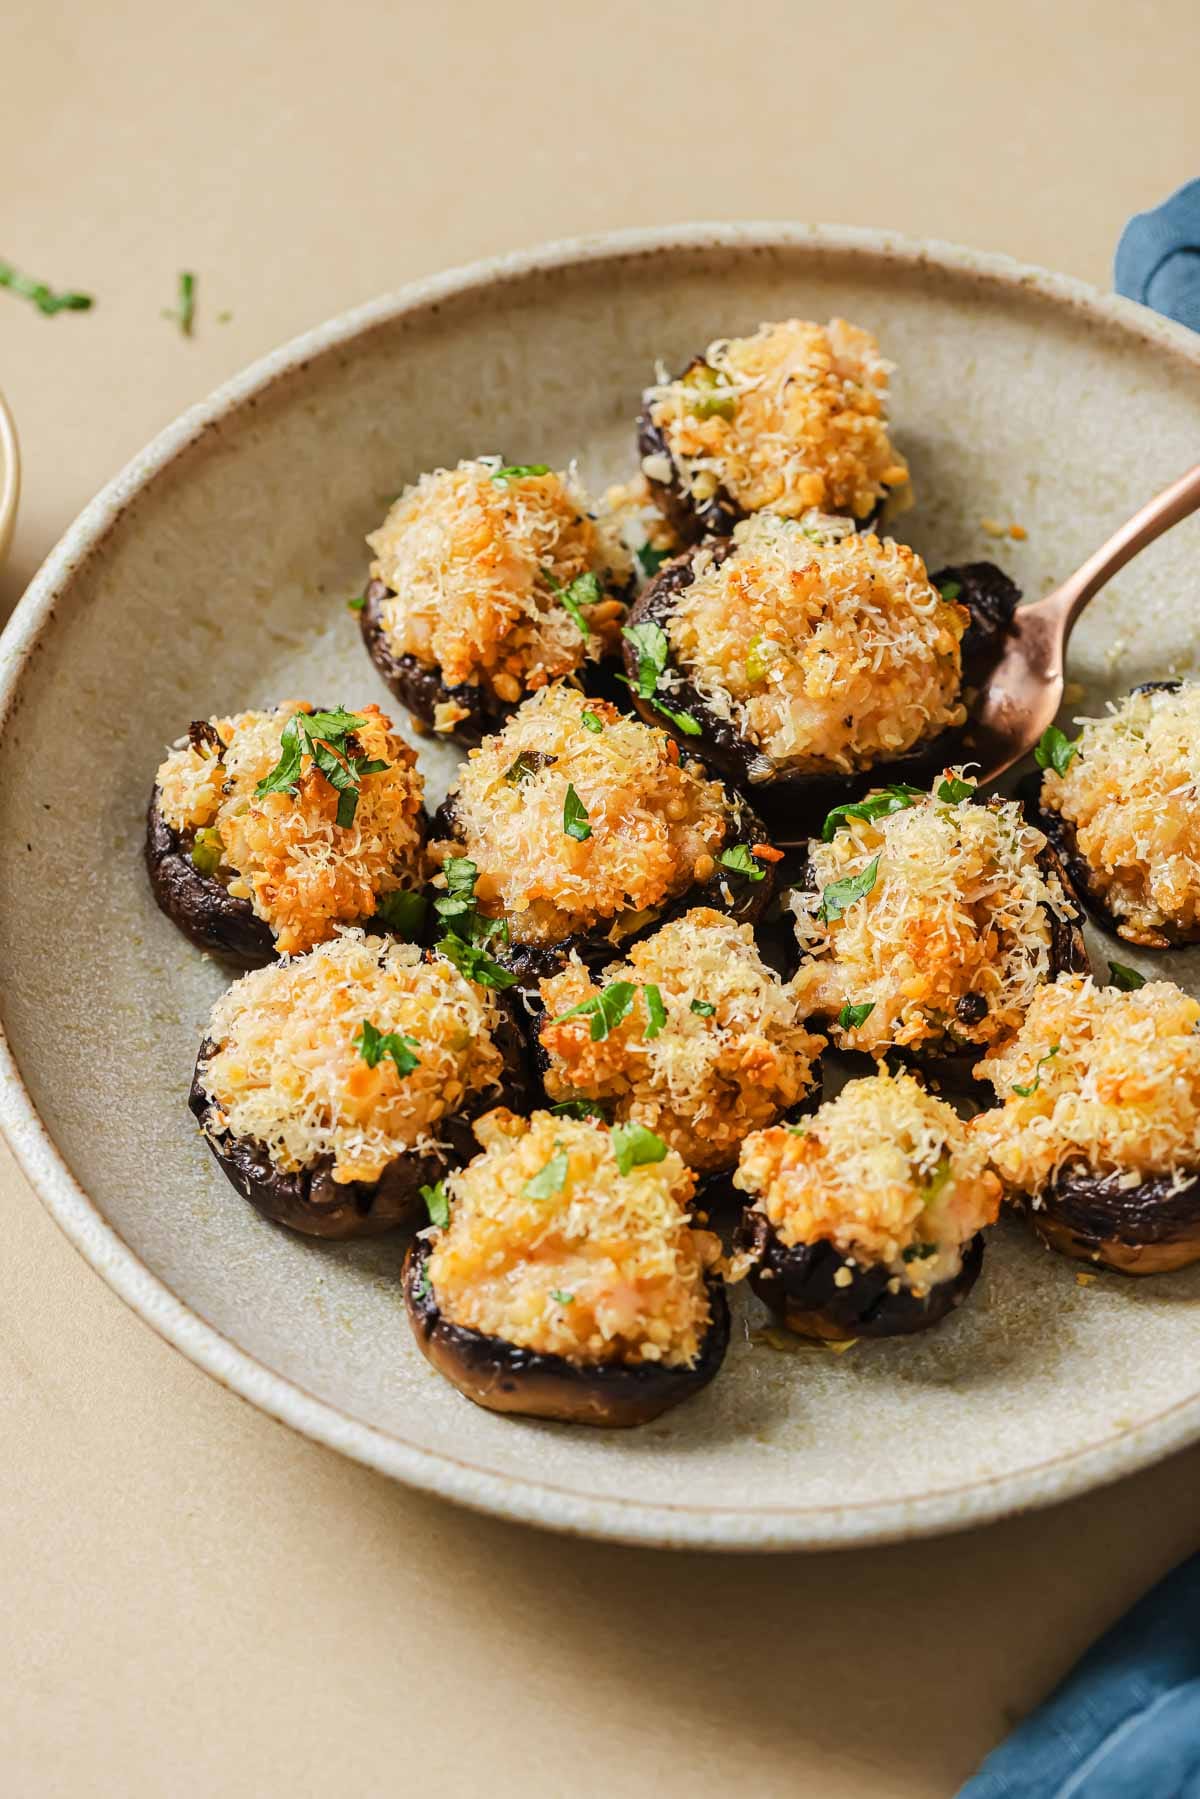 A feature side shot image shows baked and stuffed mushrooms with shrimp and seafood filling with panko crust on top.